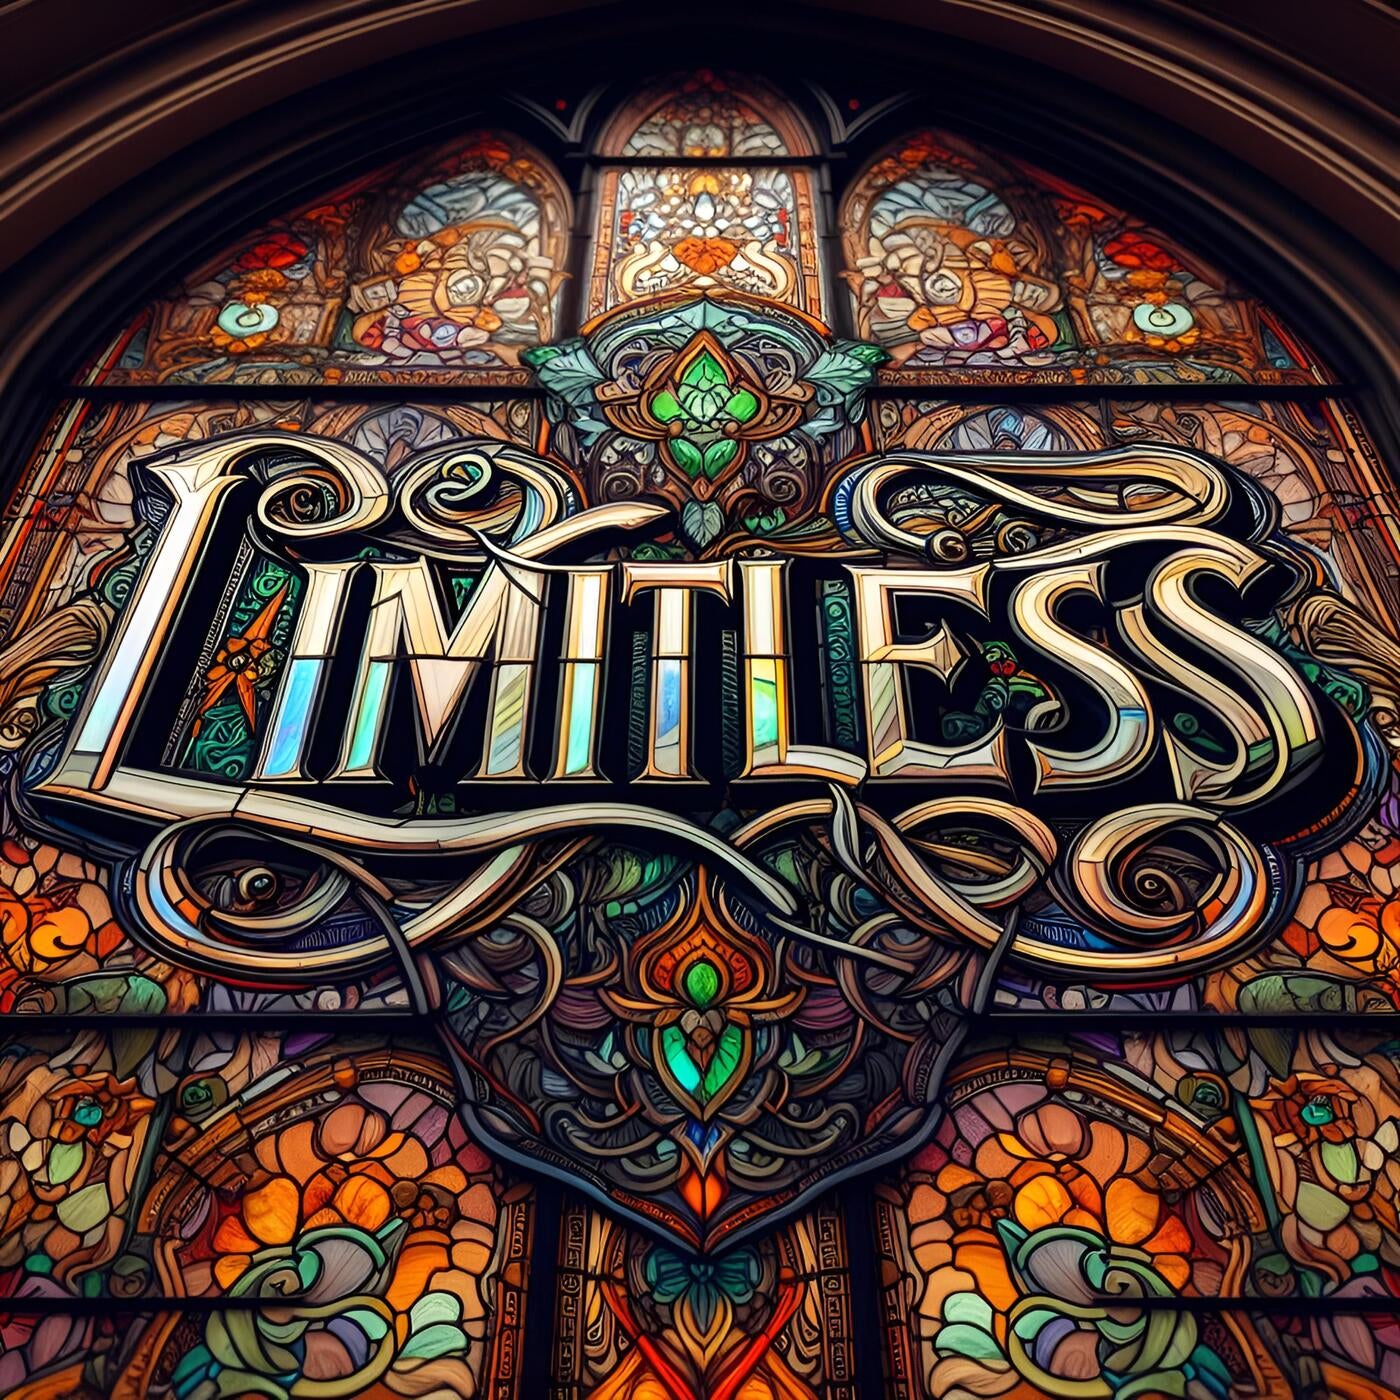 Limitless EP